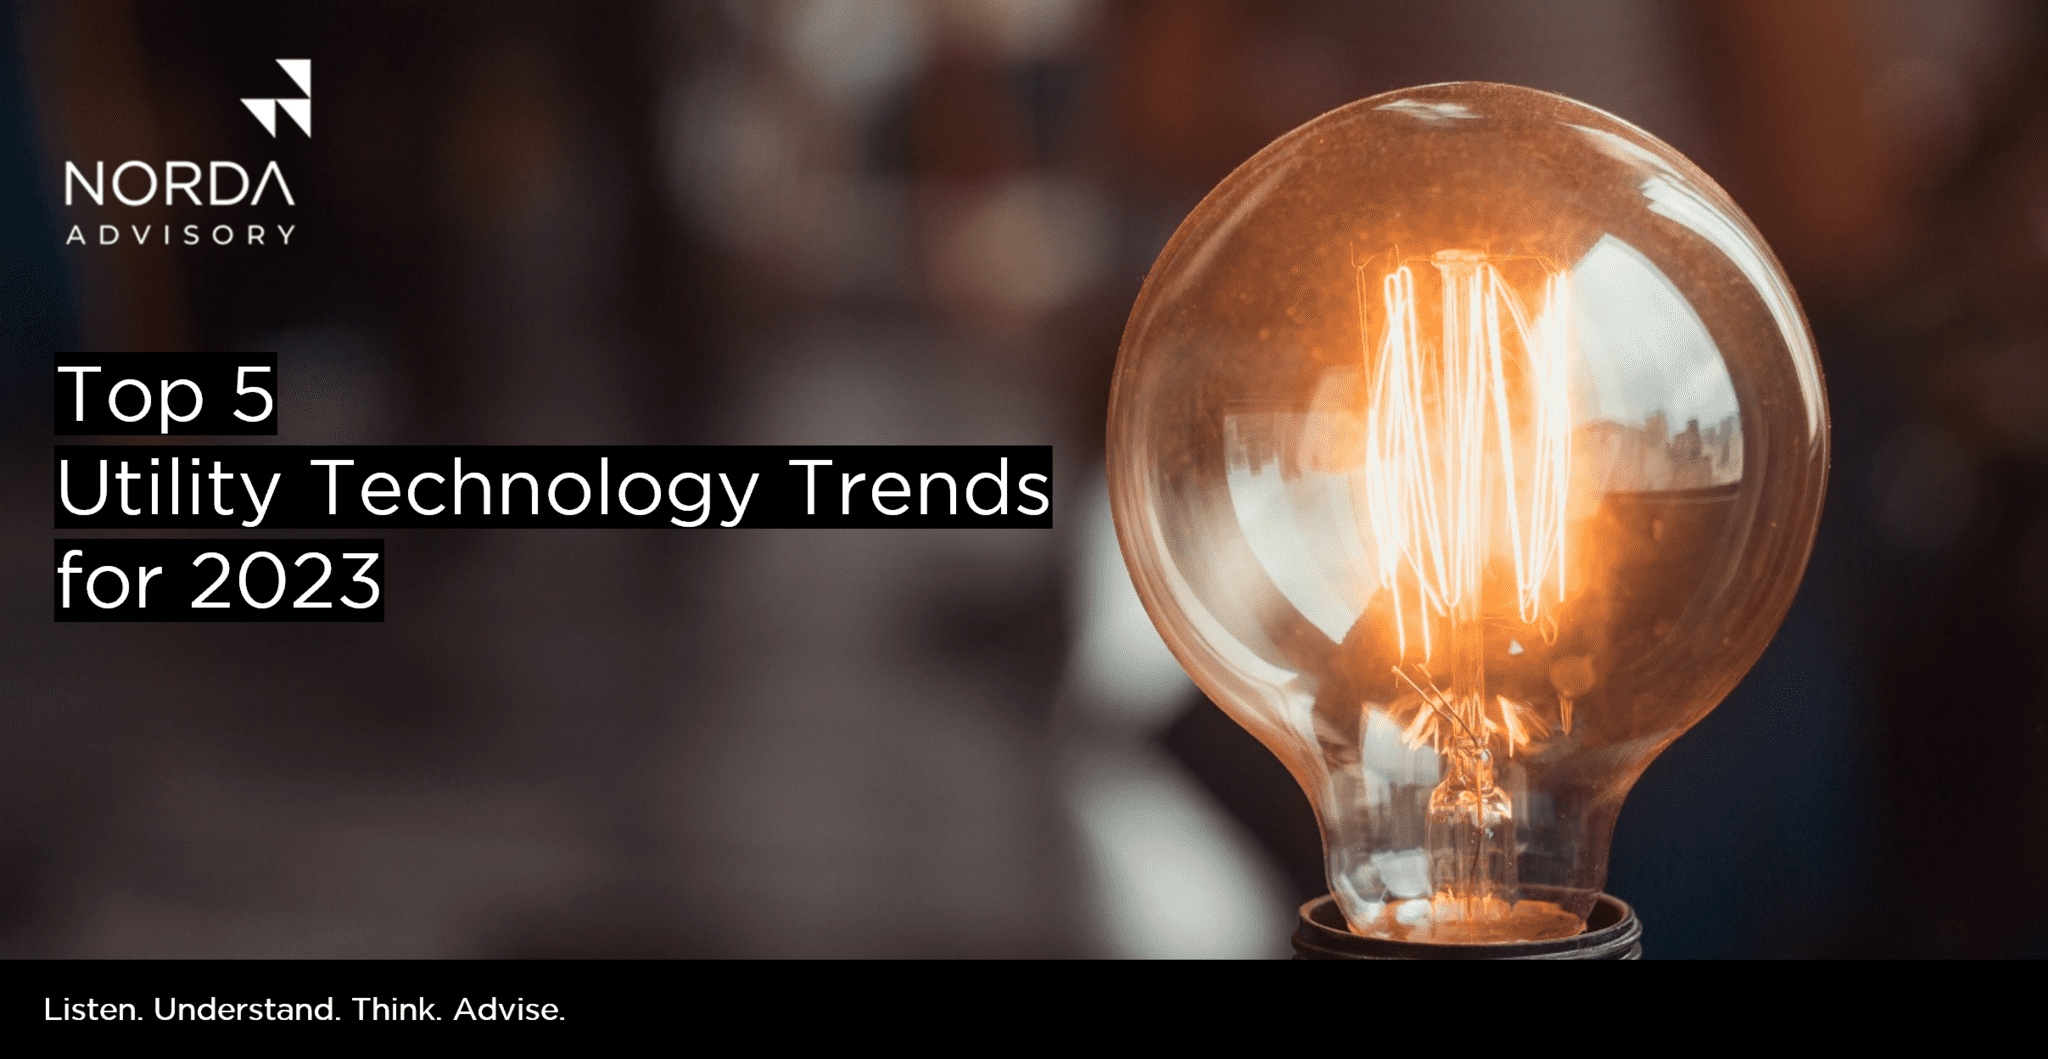 Top 5 Utility Technology Trends for 2023